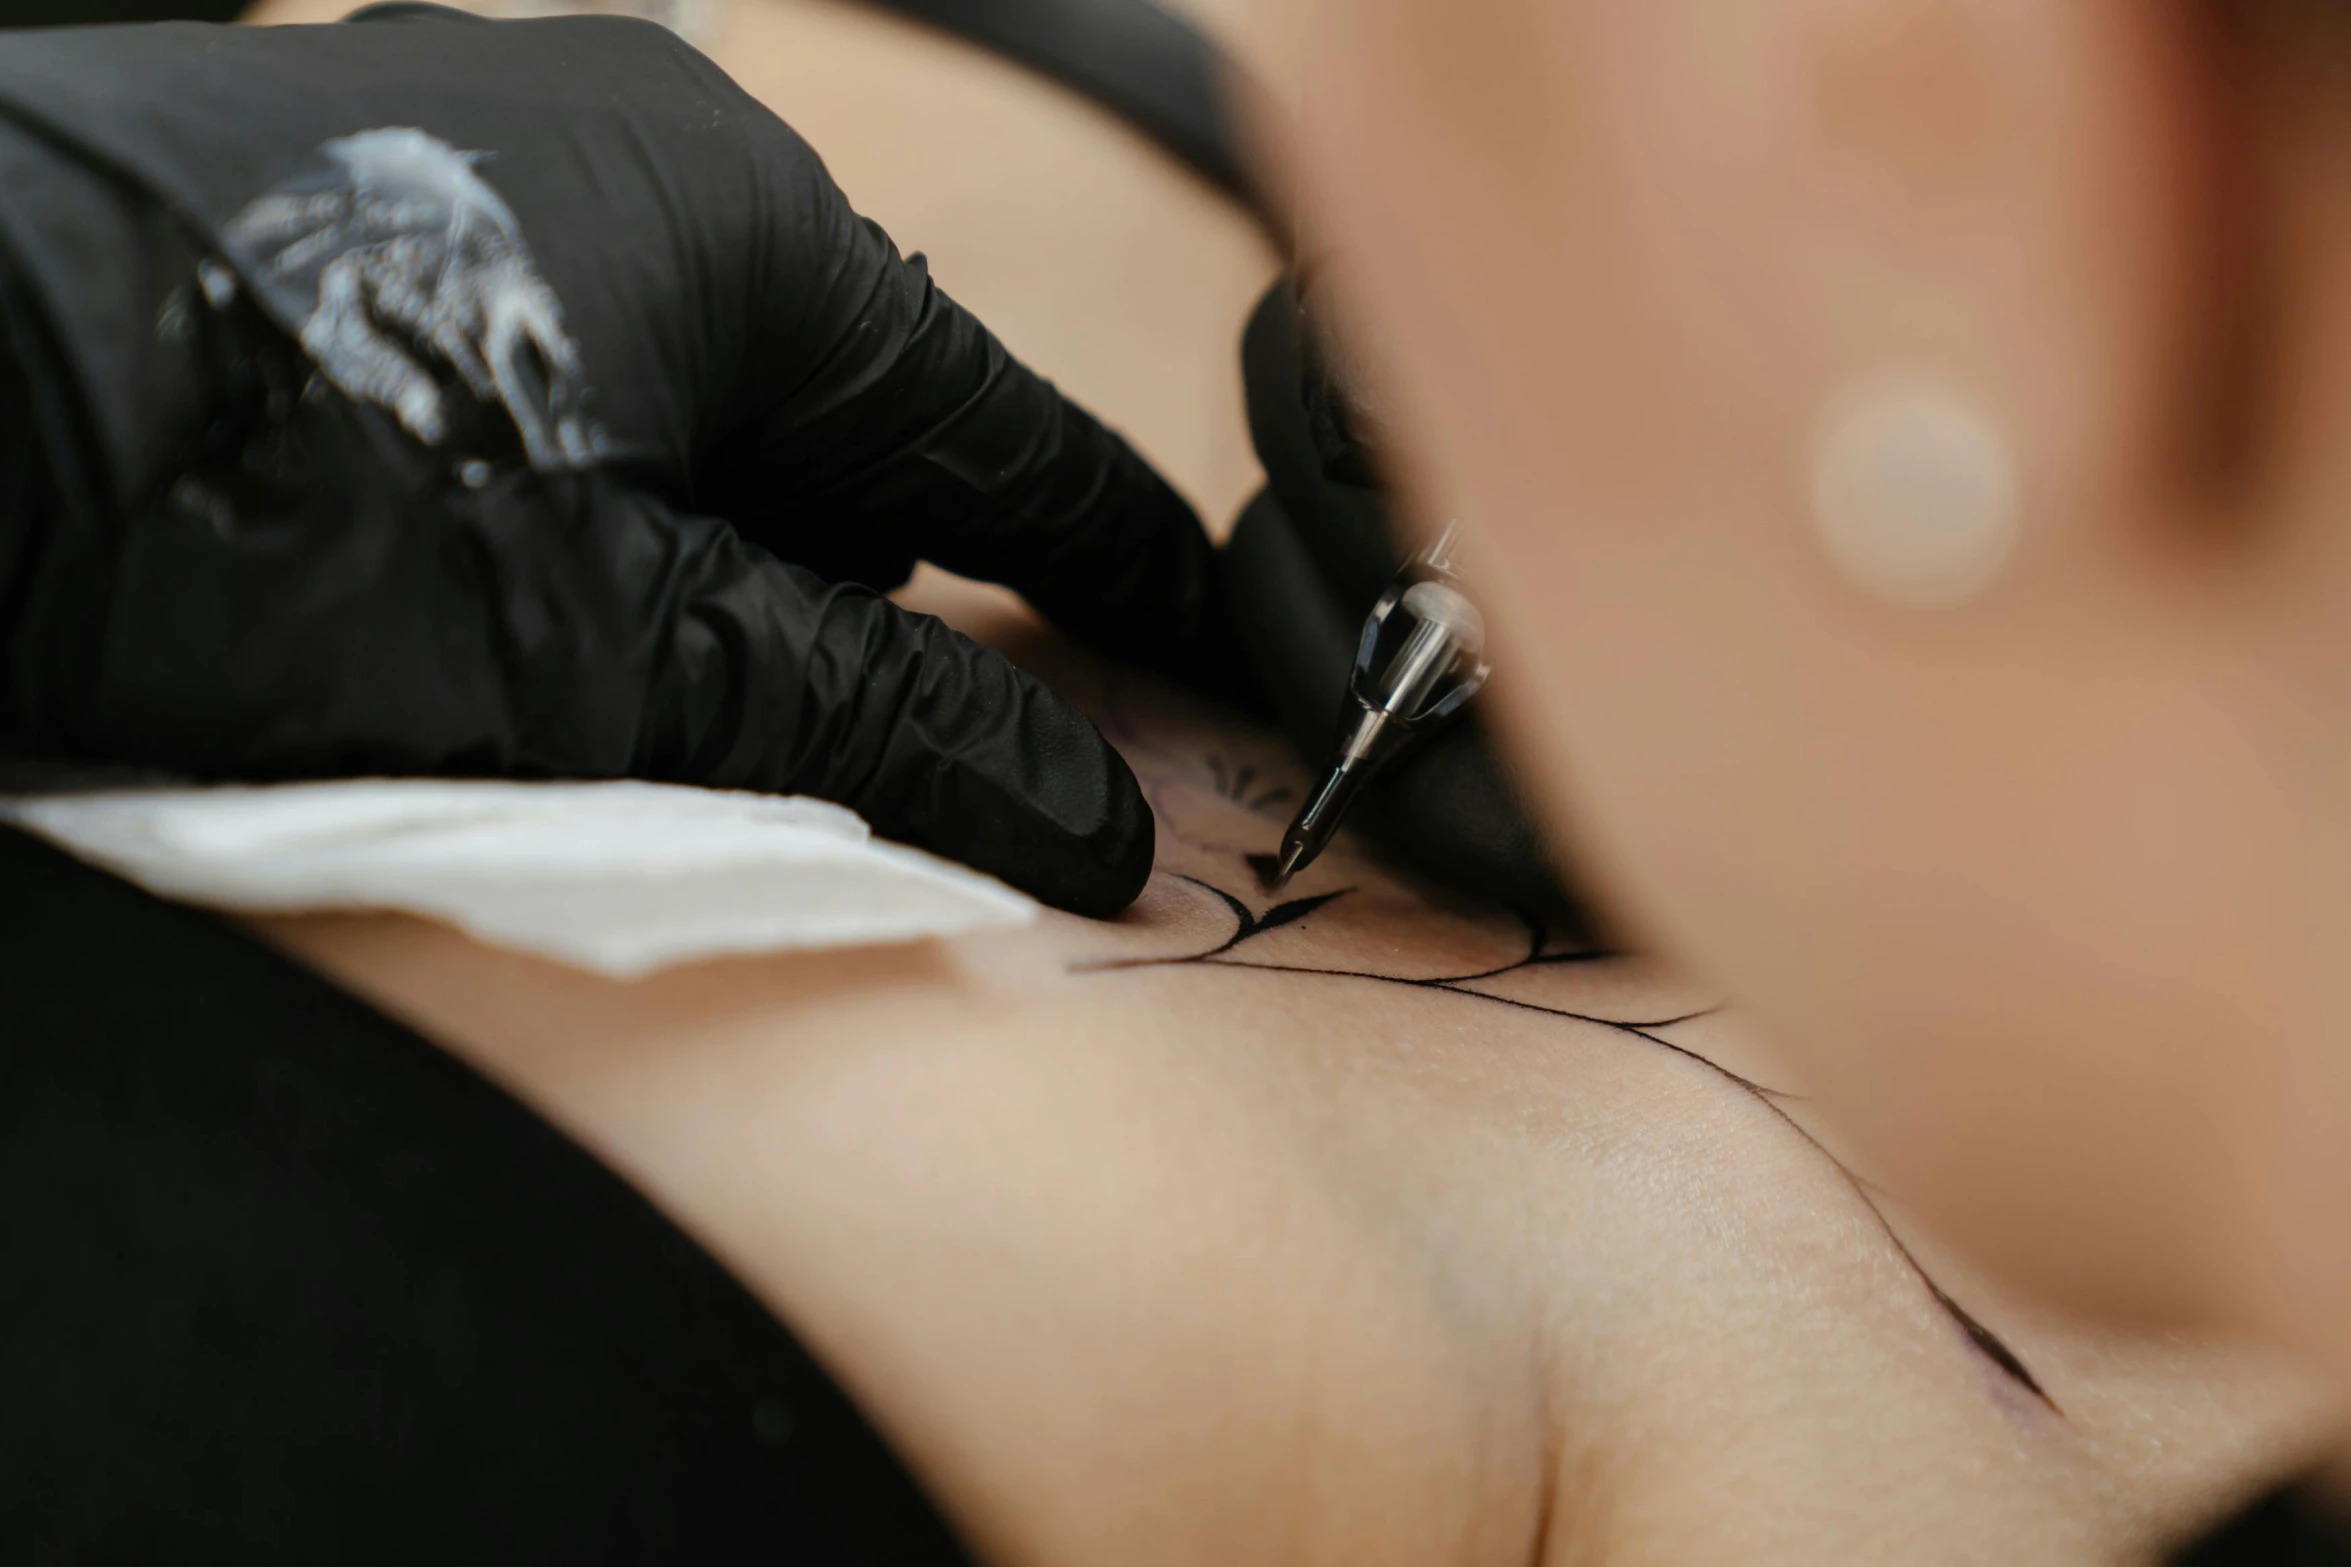 a close up of a person getting a tattoo, black outline, te pae, an impeccable beauty, low quality photo